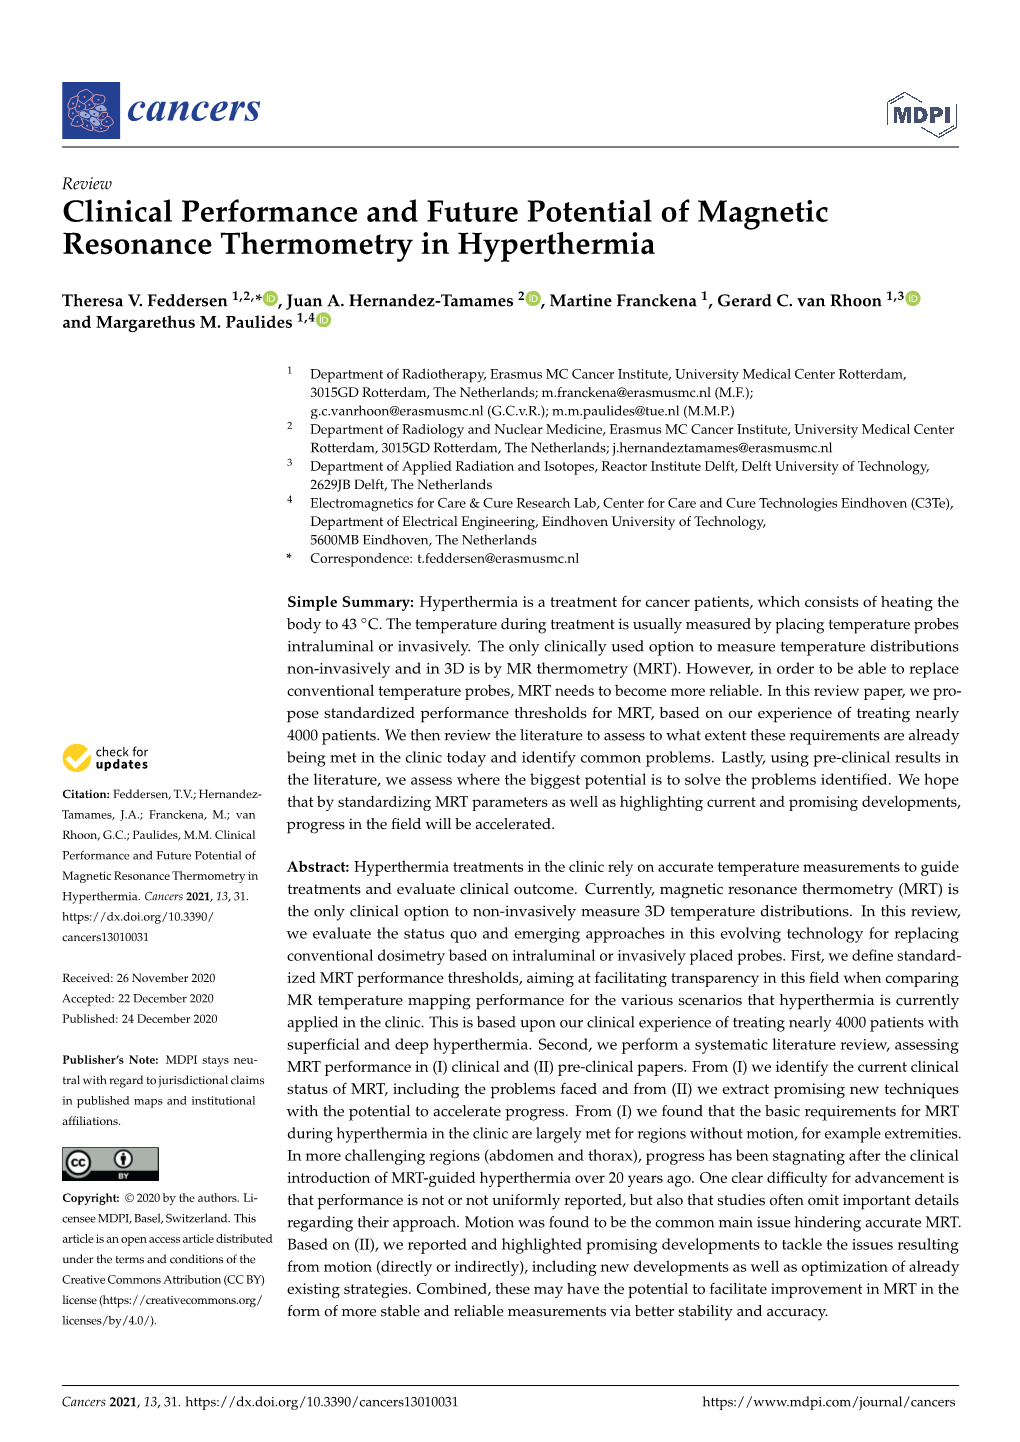 Clinical Performance and Future Potential of Magnetic Resonance Thermometry in Hyperthermia